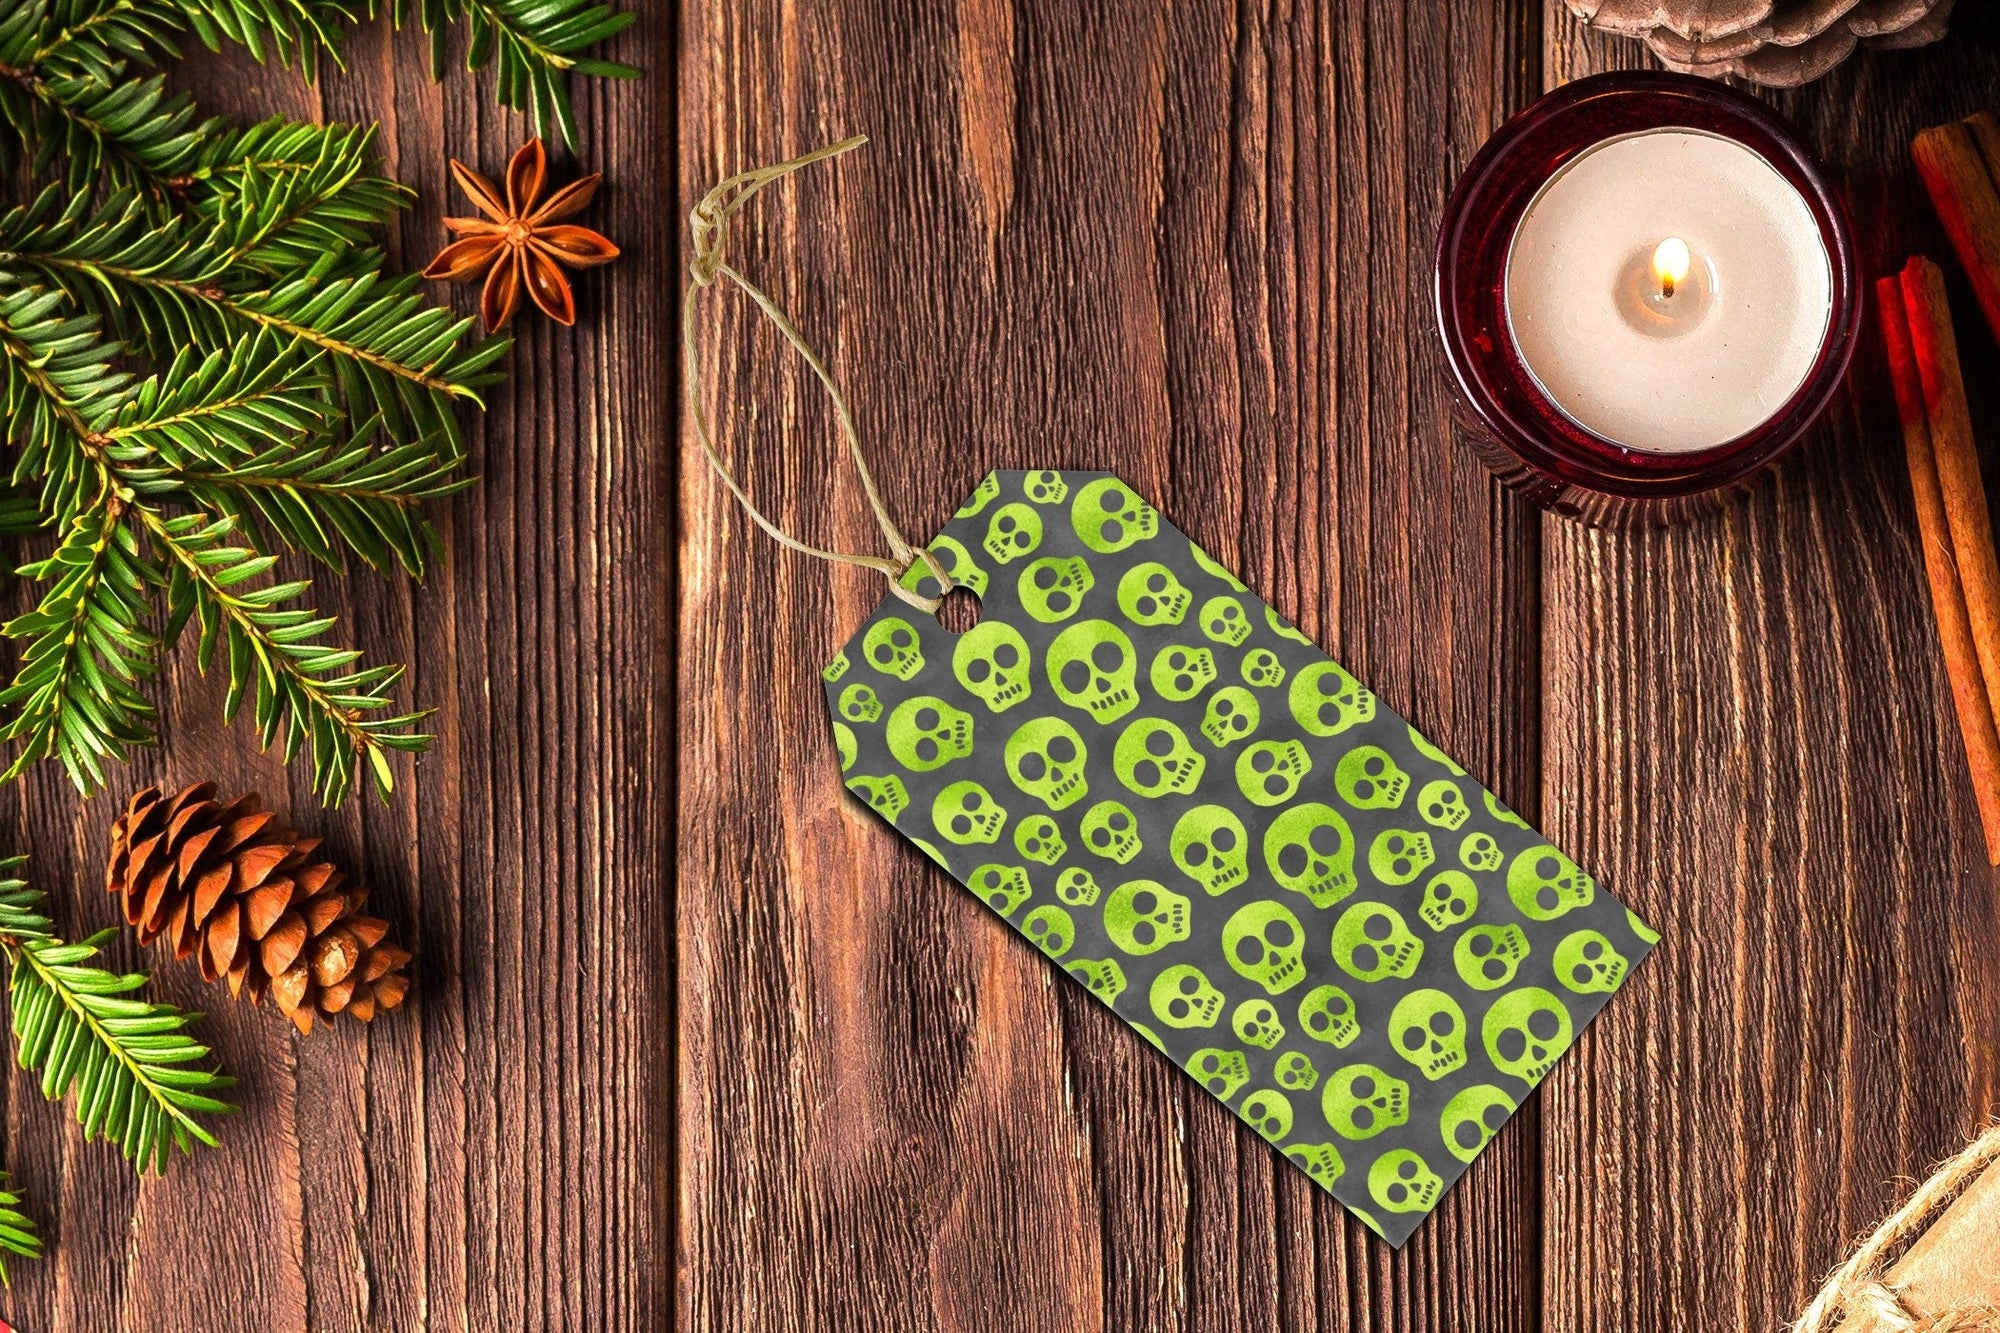 Green Skulls Gift Tags - Set of 10 Gift Tags & Labels Violagrace-174 